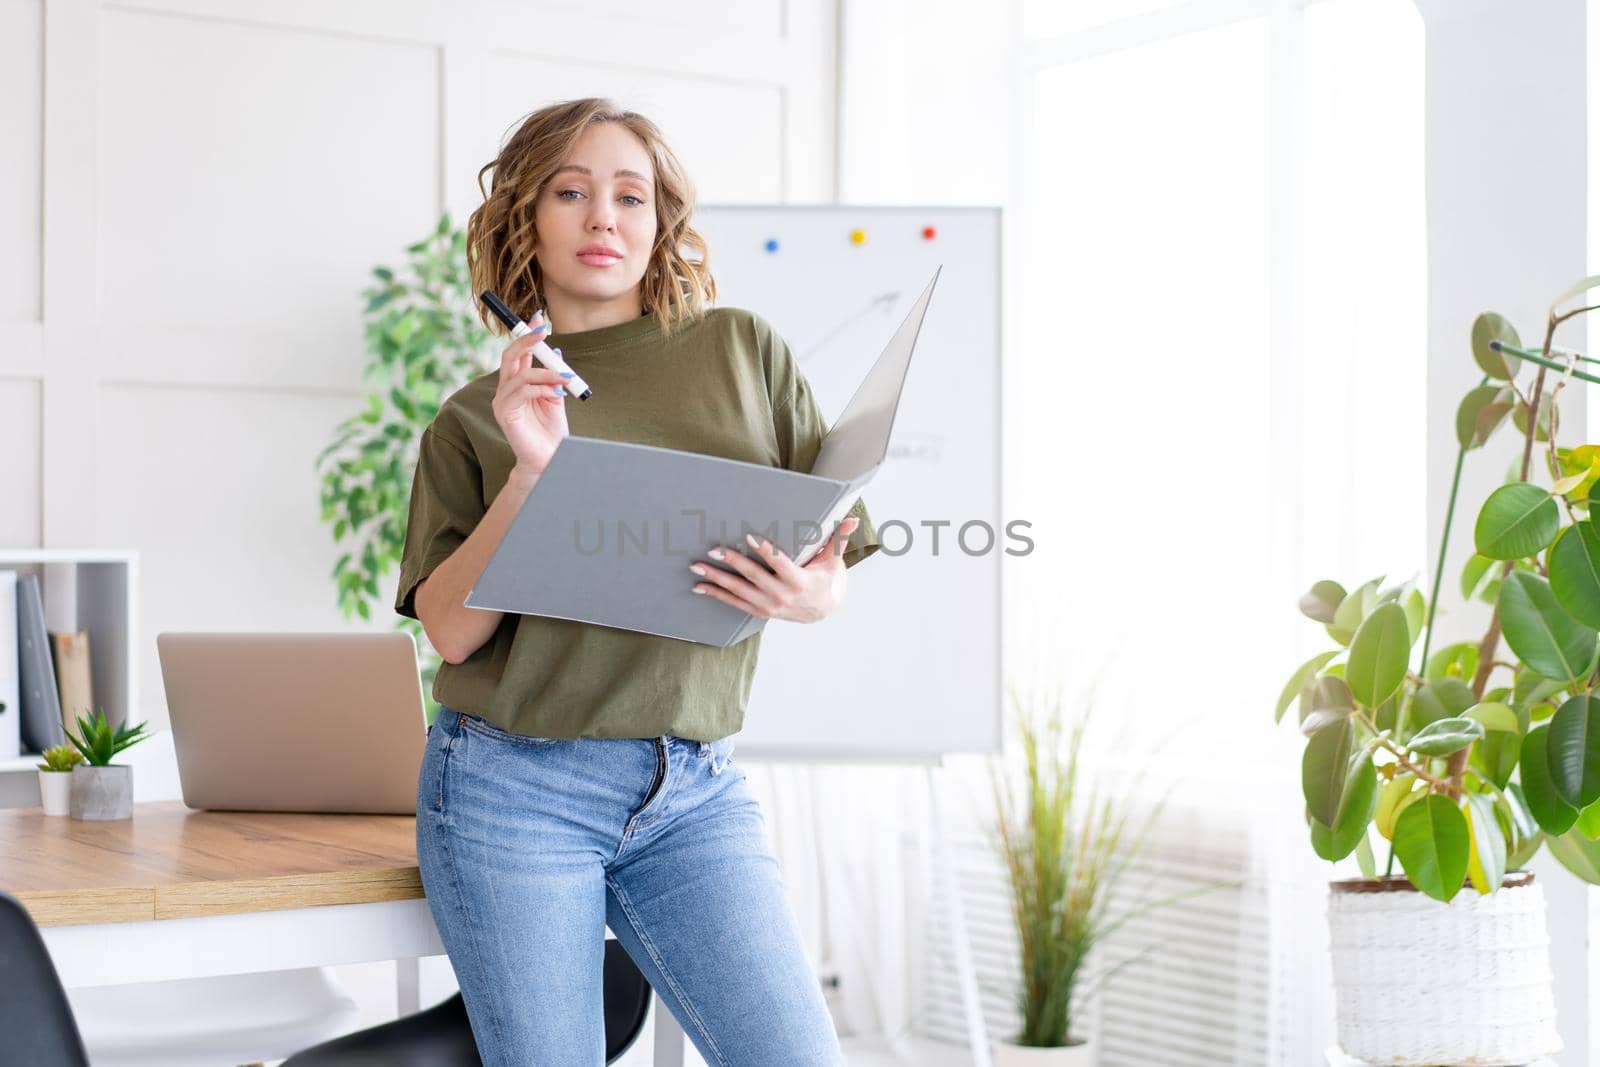 Businesswoman holding folder for paper write marker thinking dreaming standing near office table. Business person femal ypoung adult caucasian on modern white interior